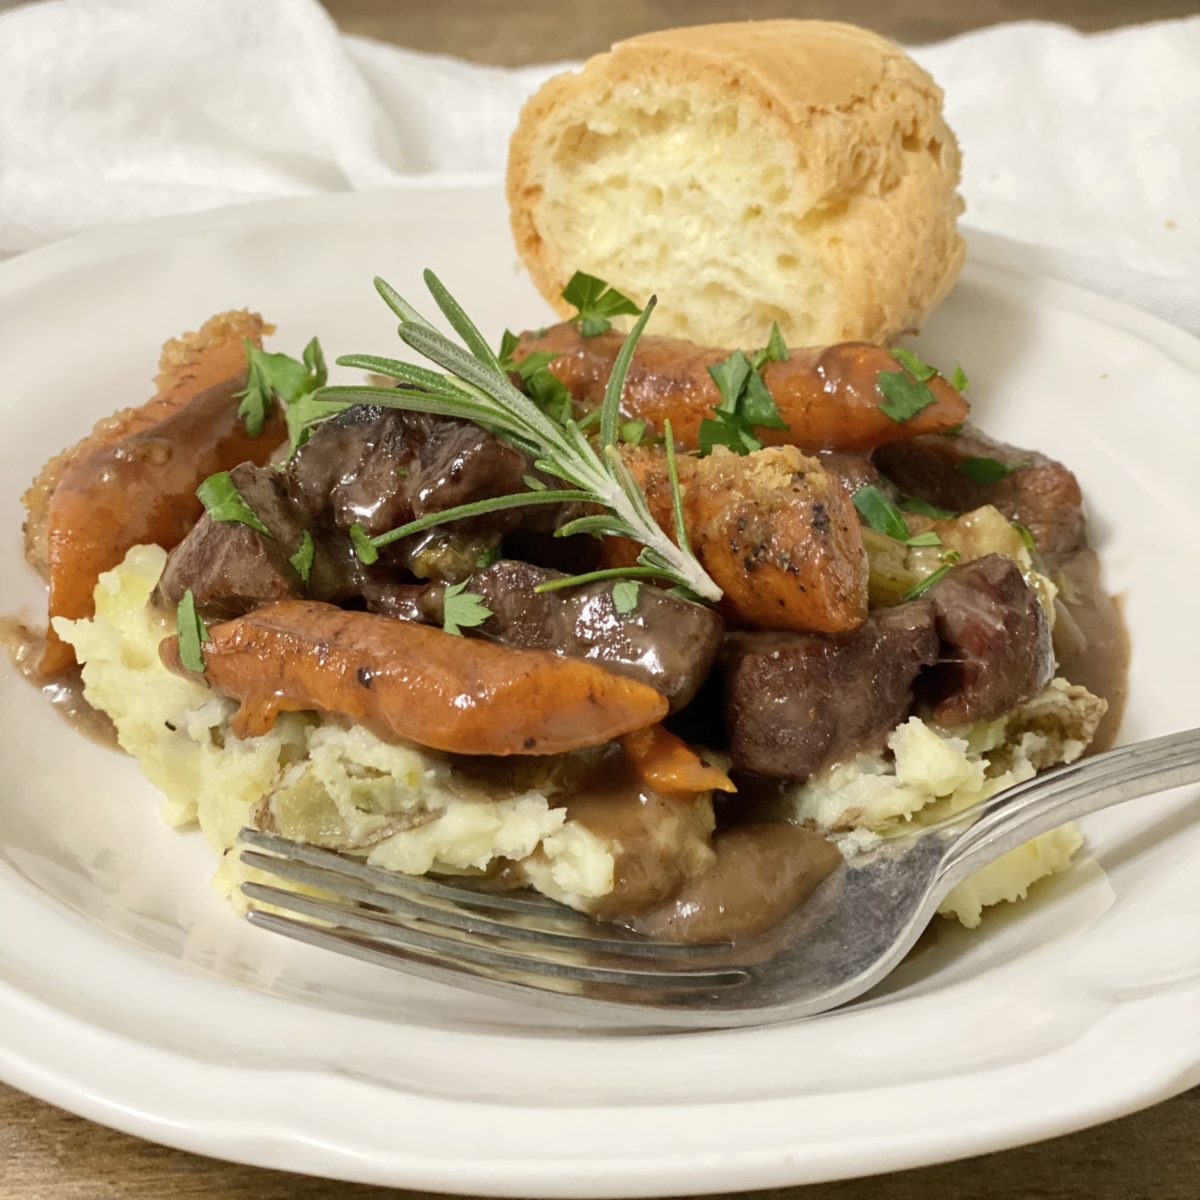 (No Peek) Oven Beef Stew over mashed potatoes in a white bowl with bread on the side.